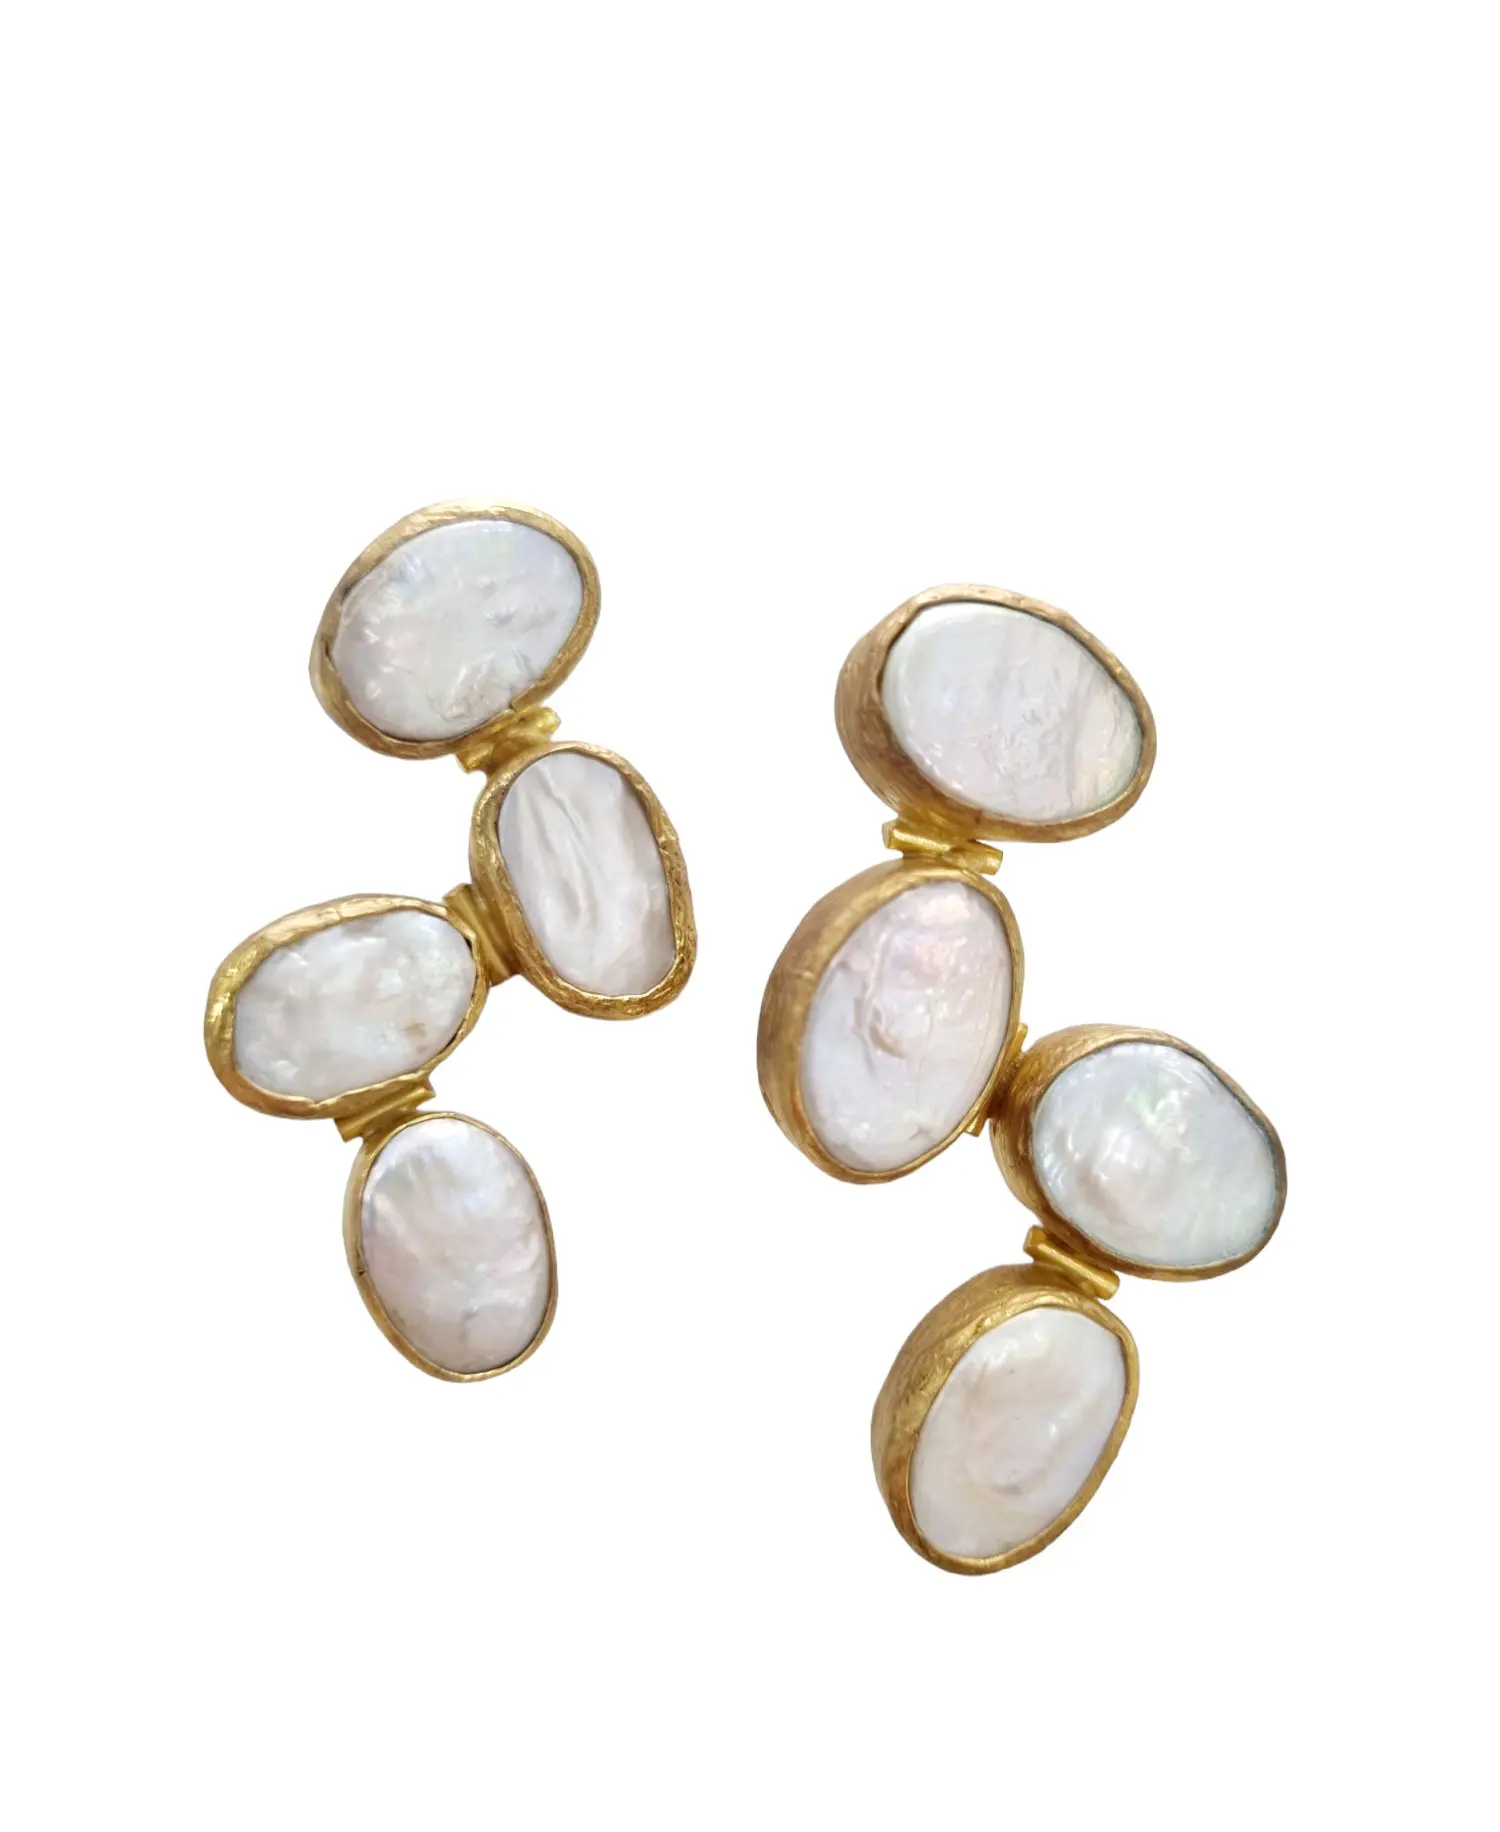 Earrings made with pearls set in brass. weight 14.2grLength 4.5cm